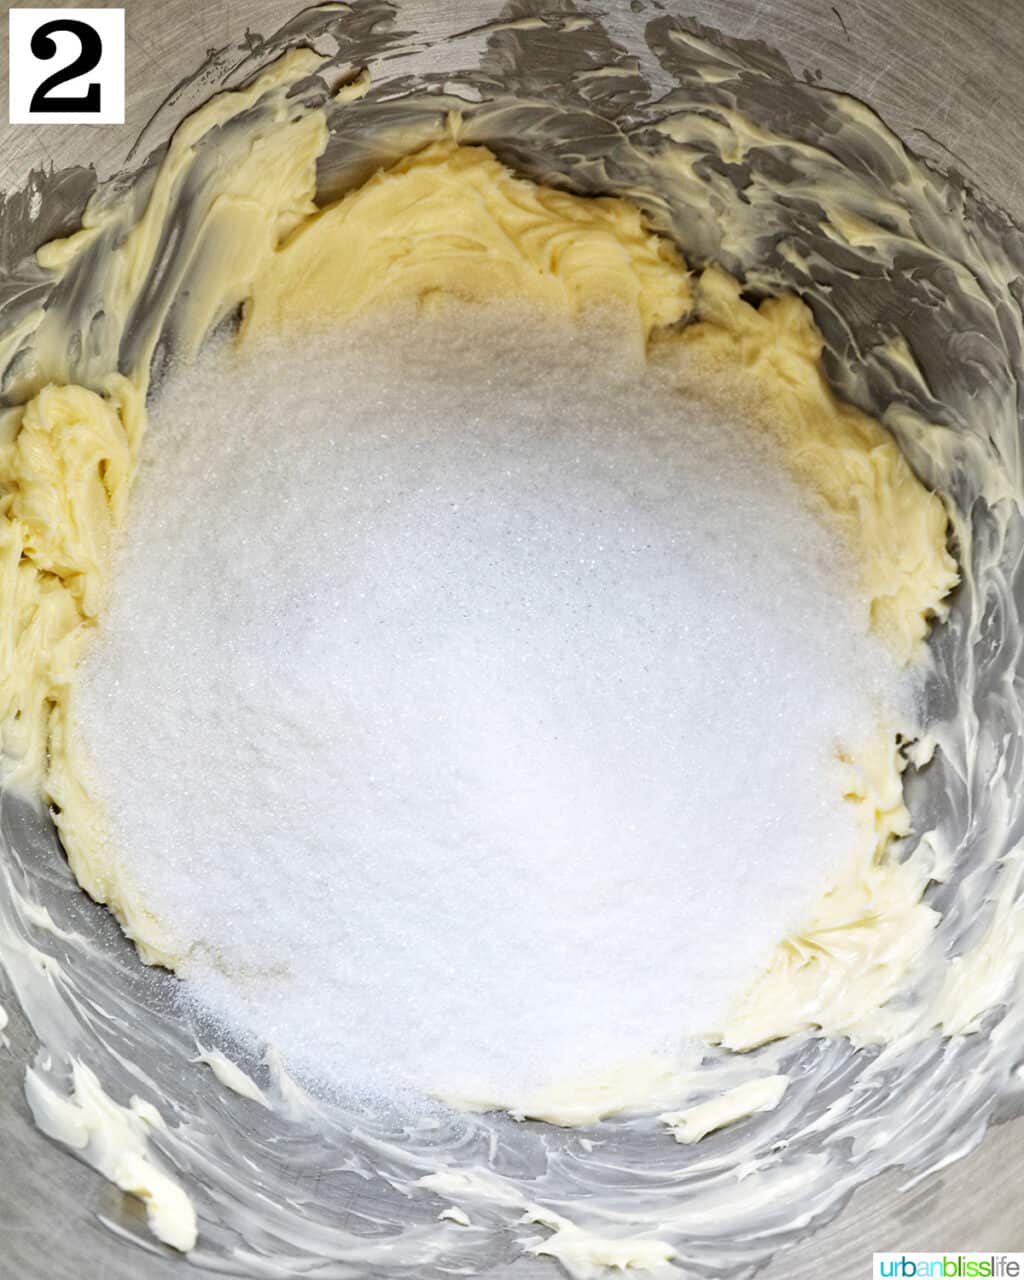 Creaming sugar and butter in the stainless steel bowl of a stand mixer.